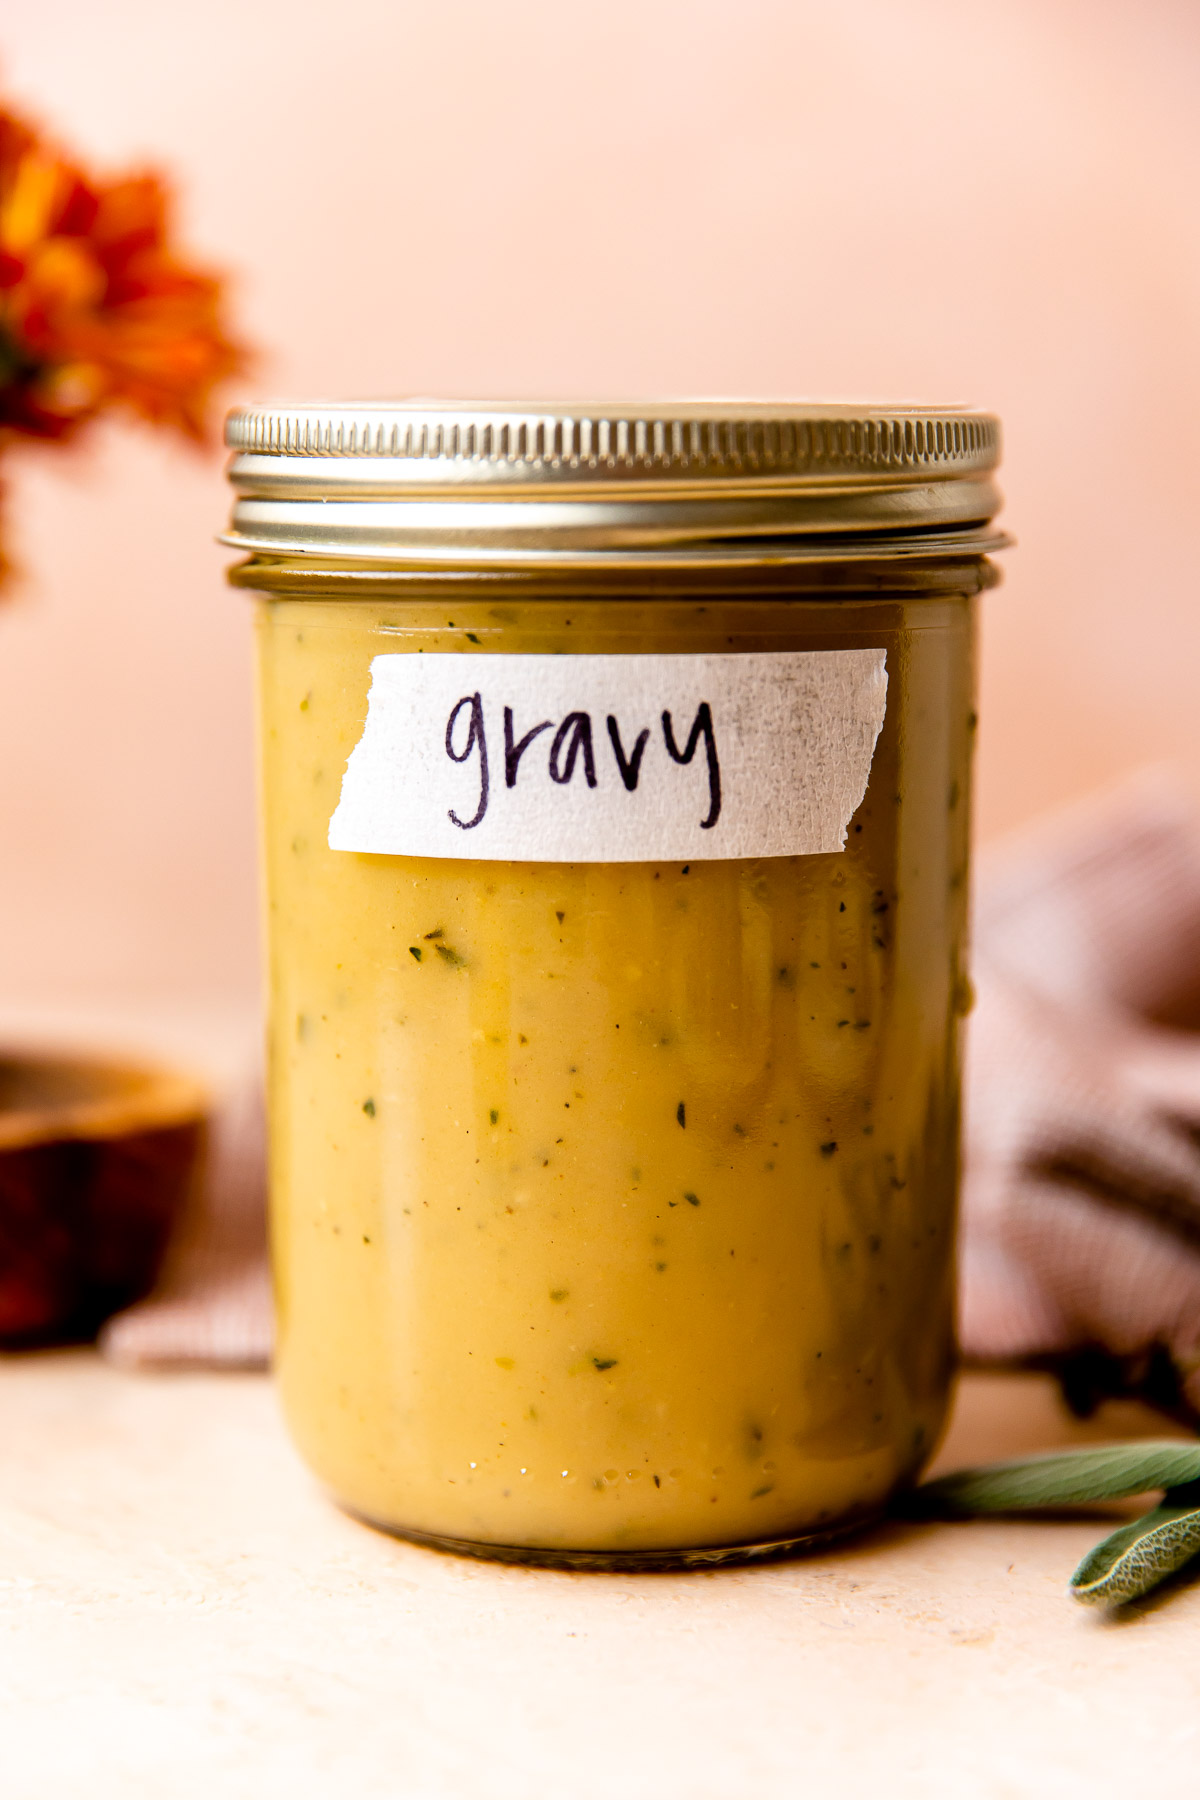 Make ahead turkey gravy fills a large clear glass mason jar. The jar sits atop a light peach colored textured surface and is surrounded by orange florals, a small wooden pinch bowl filled with kosher salt, a muted red linen napkin, and loose sprigs of fresh herbs.